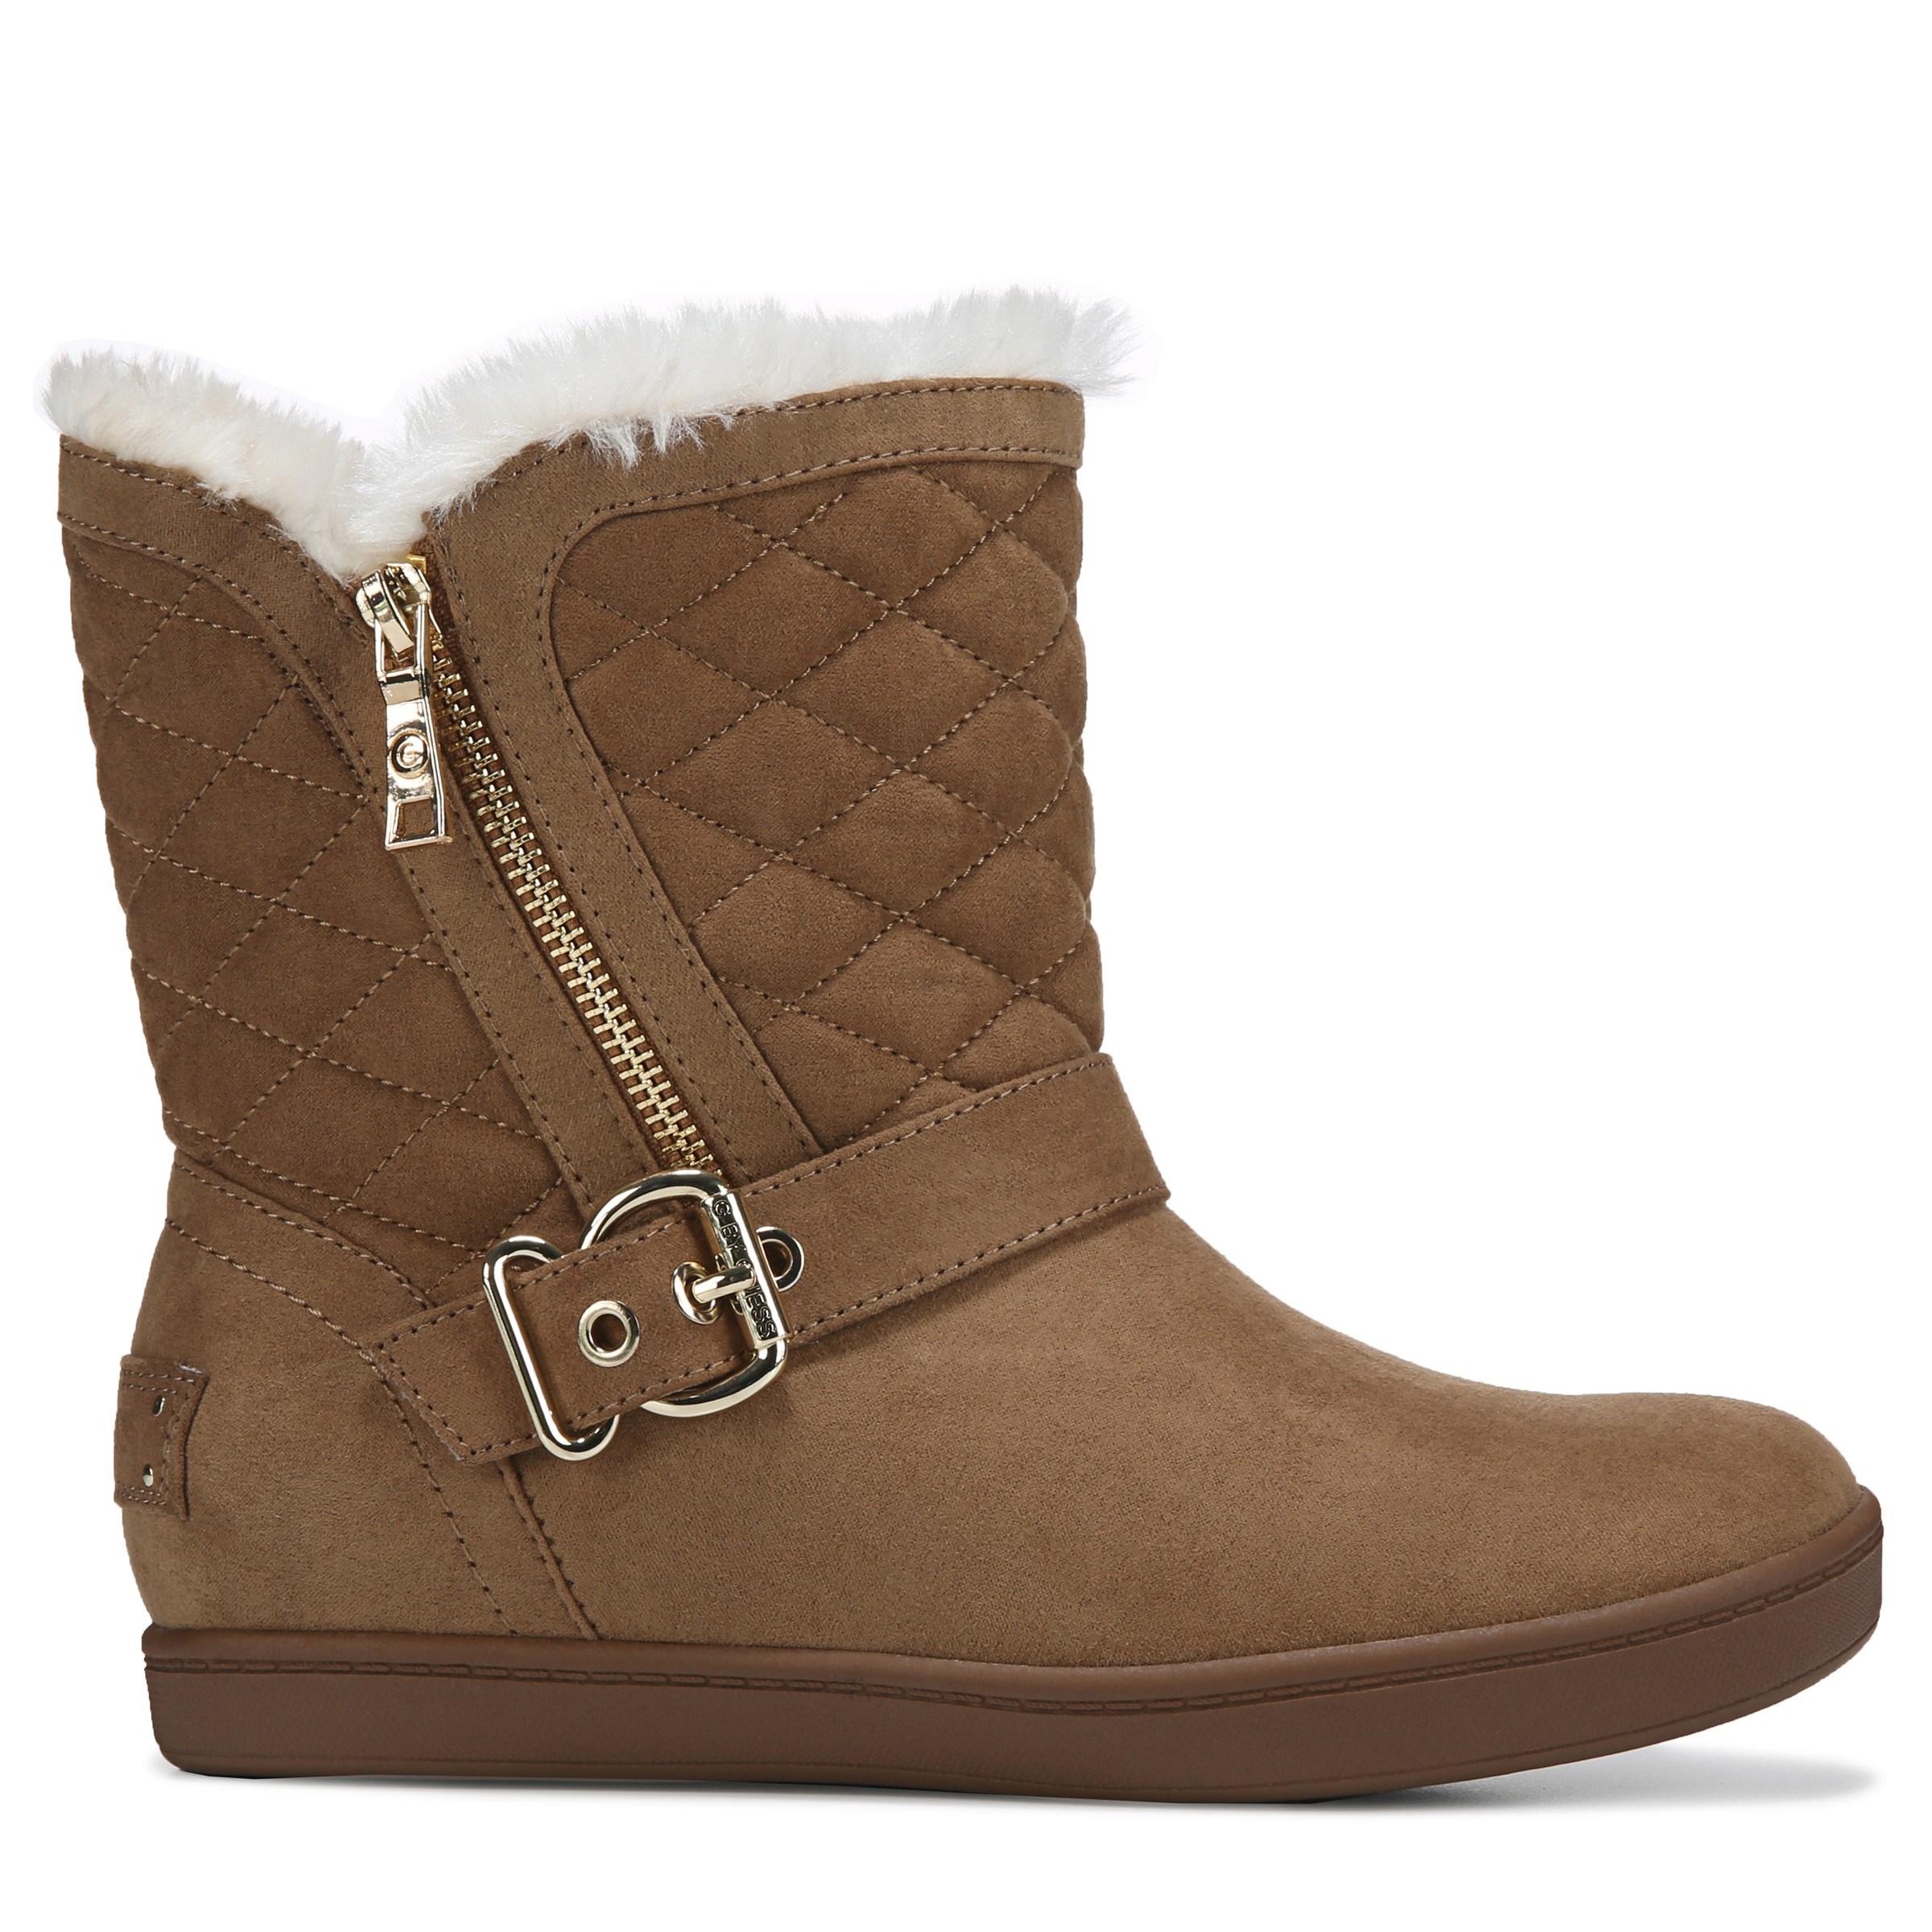 G by Guess Phace Winter Boots in Brown 